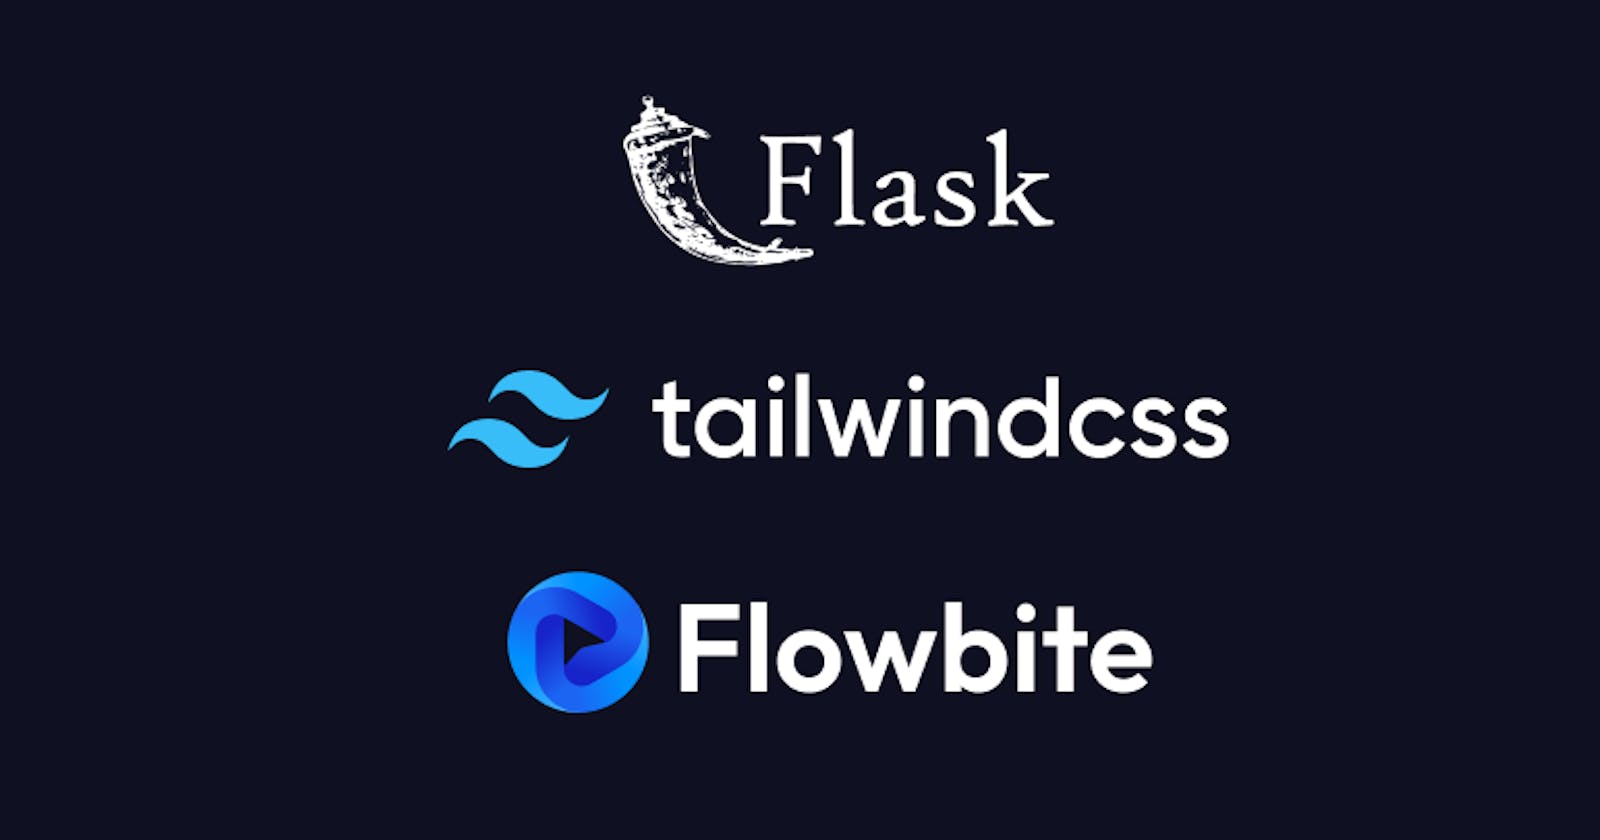 How to install Flask with Tailwind CSS and Flowbite